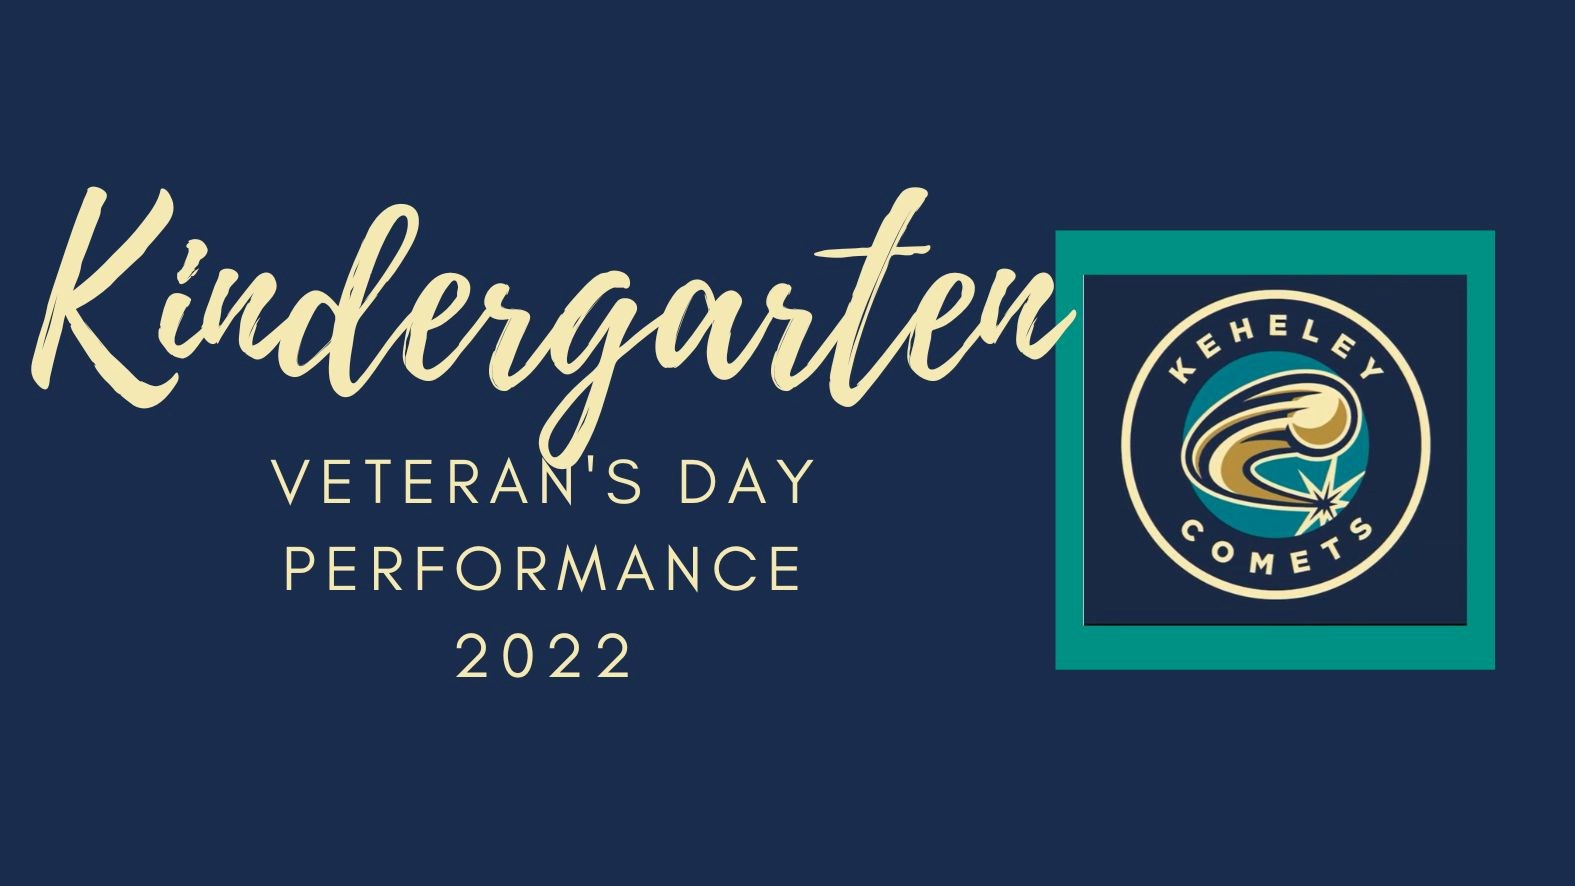 Kindergarten Veteran's Day Performance 2022 on nay background with Keheley Comets logo